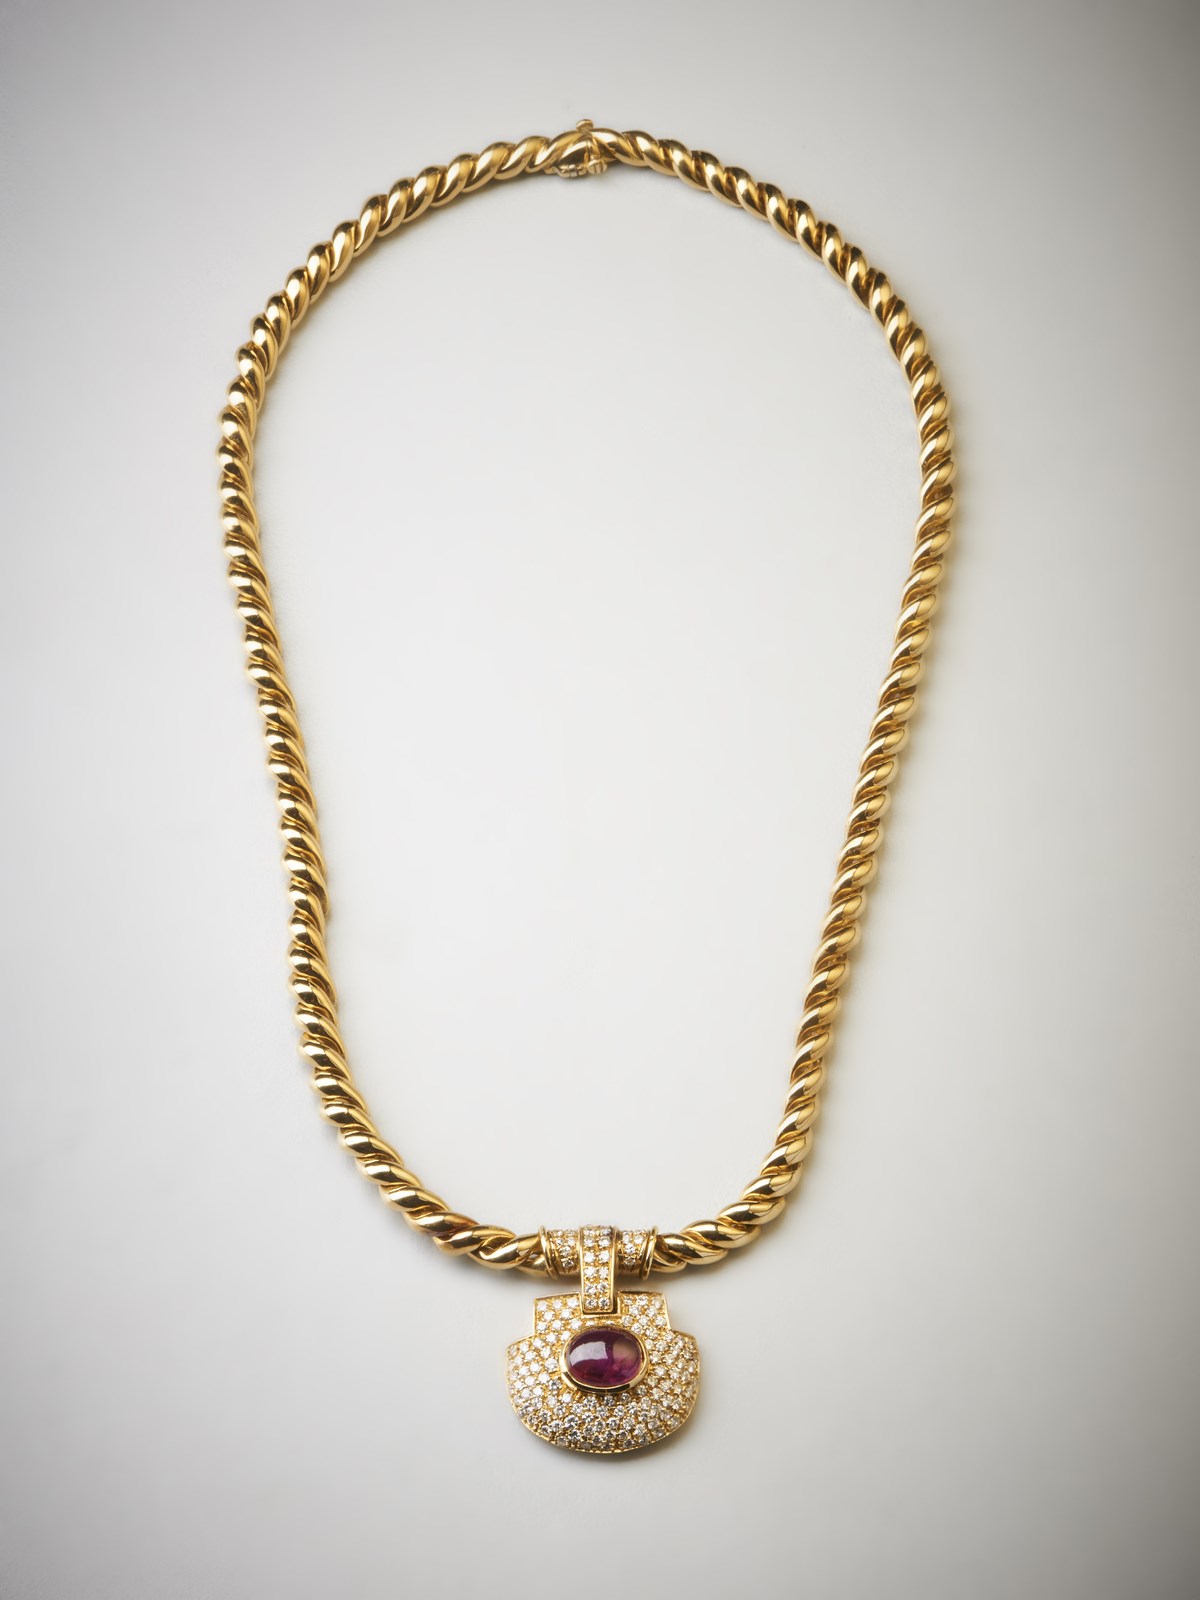 Necklace in yellow gold 750/1000 mesh intertwined with pendant with pavè of brilliant cut diamonds 2,80 carats approx. and oval cabochon ruby of about 4.50 carats. (. )